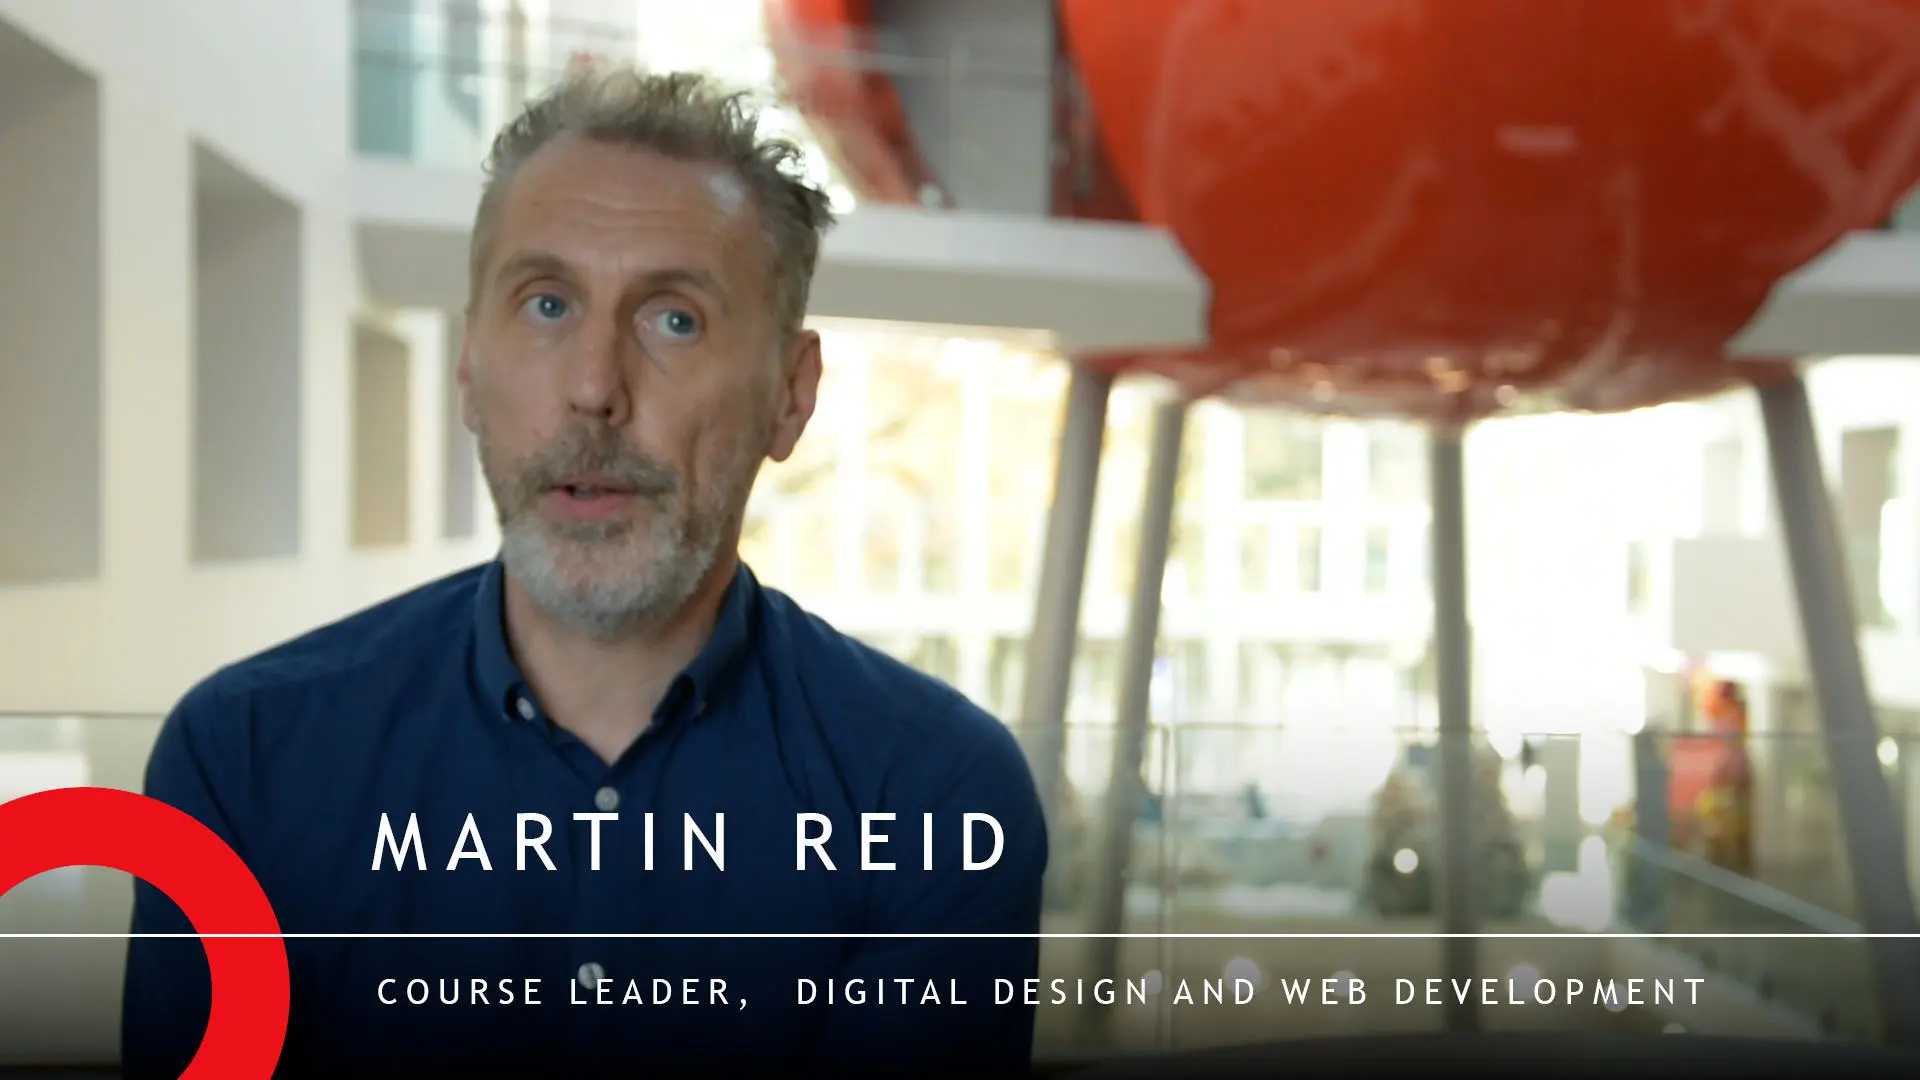 Course leader of Digital Design and Web Development, Martin Reid is sat in The Spark building at Solent University, with the red Pod out of focus in the background. His name and job description are displayed in white text at the bottom of the screen with a red semi circle bottom left of the screen.